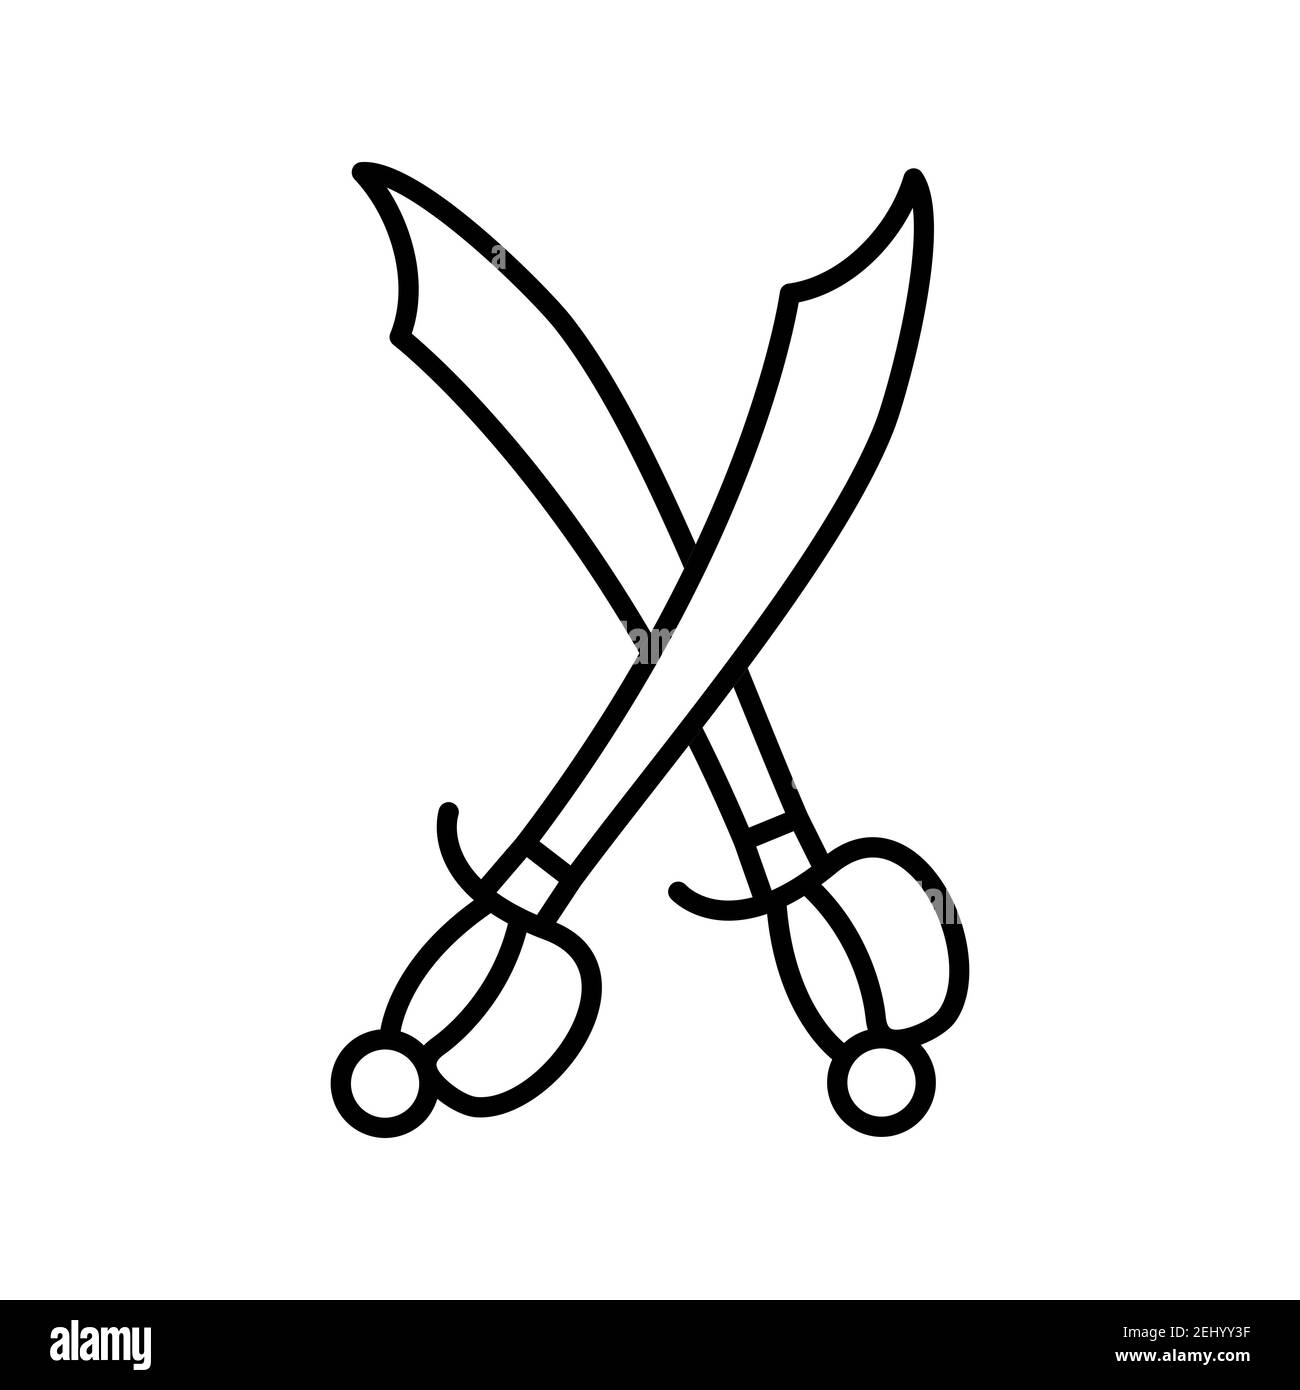 Illustration of cross swords line vector icon isolated on white background Stock Photo